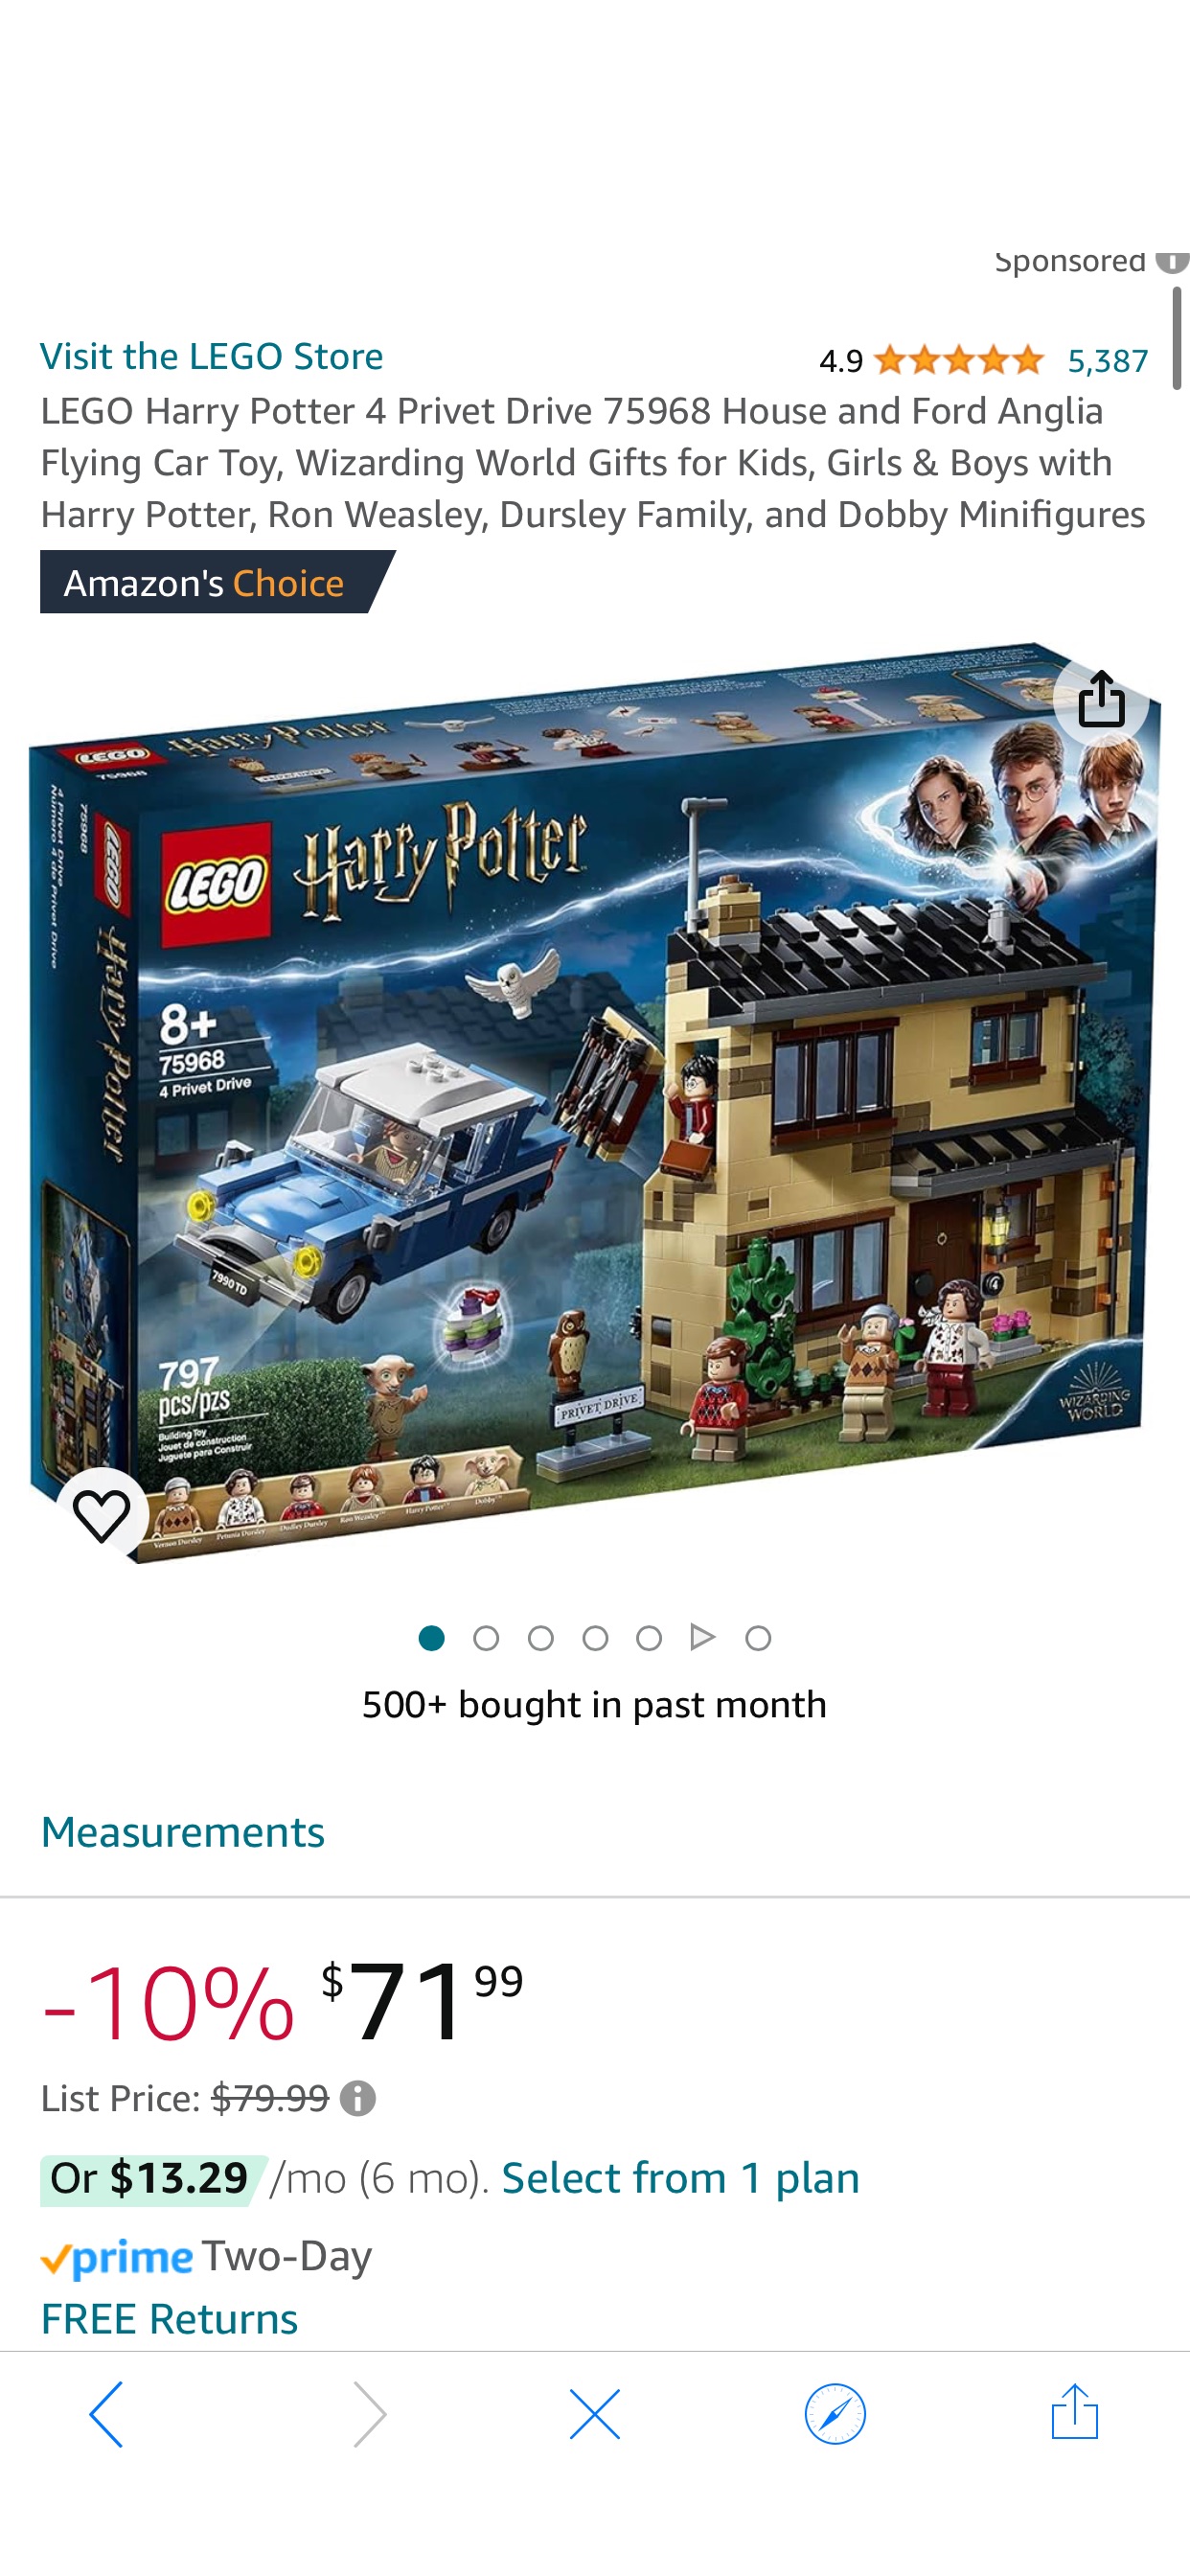 Amazon.com: LEGO Harry Potter 4 Privet Drive 75968 House and Ford Anglia Flying Car Toy, Wizarding World Gifts for Kids, Girls & Boys with Harry Potter, Ron Weasley, Dursley Family, and Dobby Minifigu